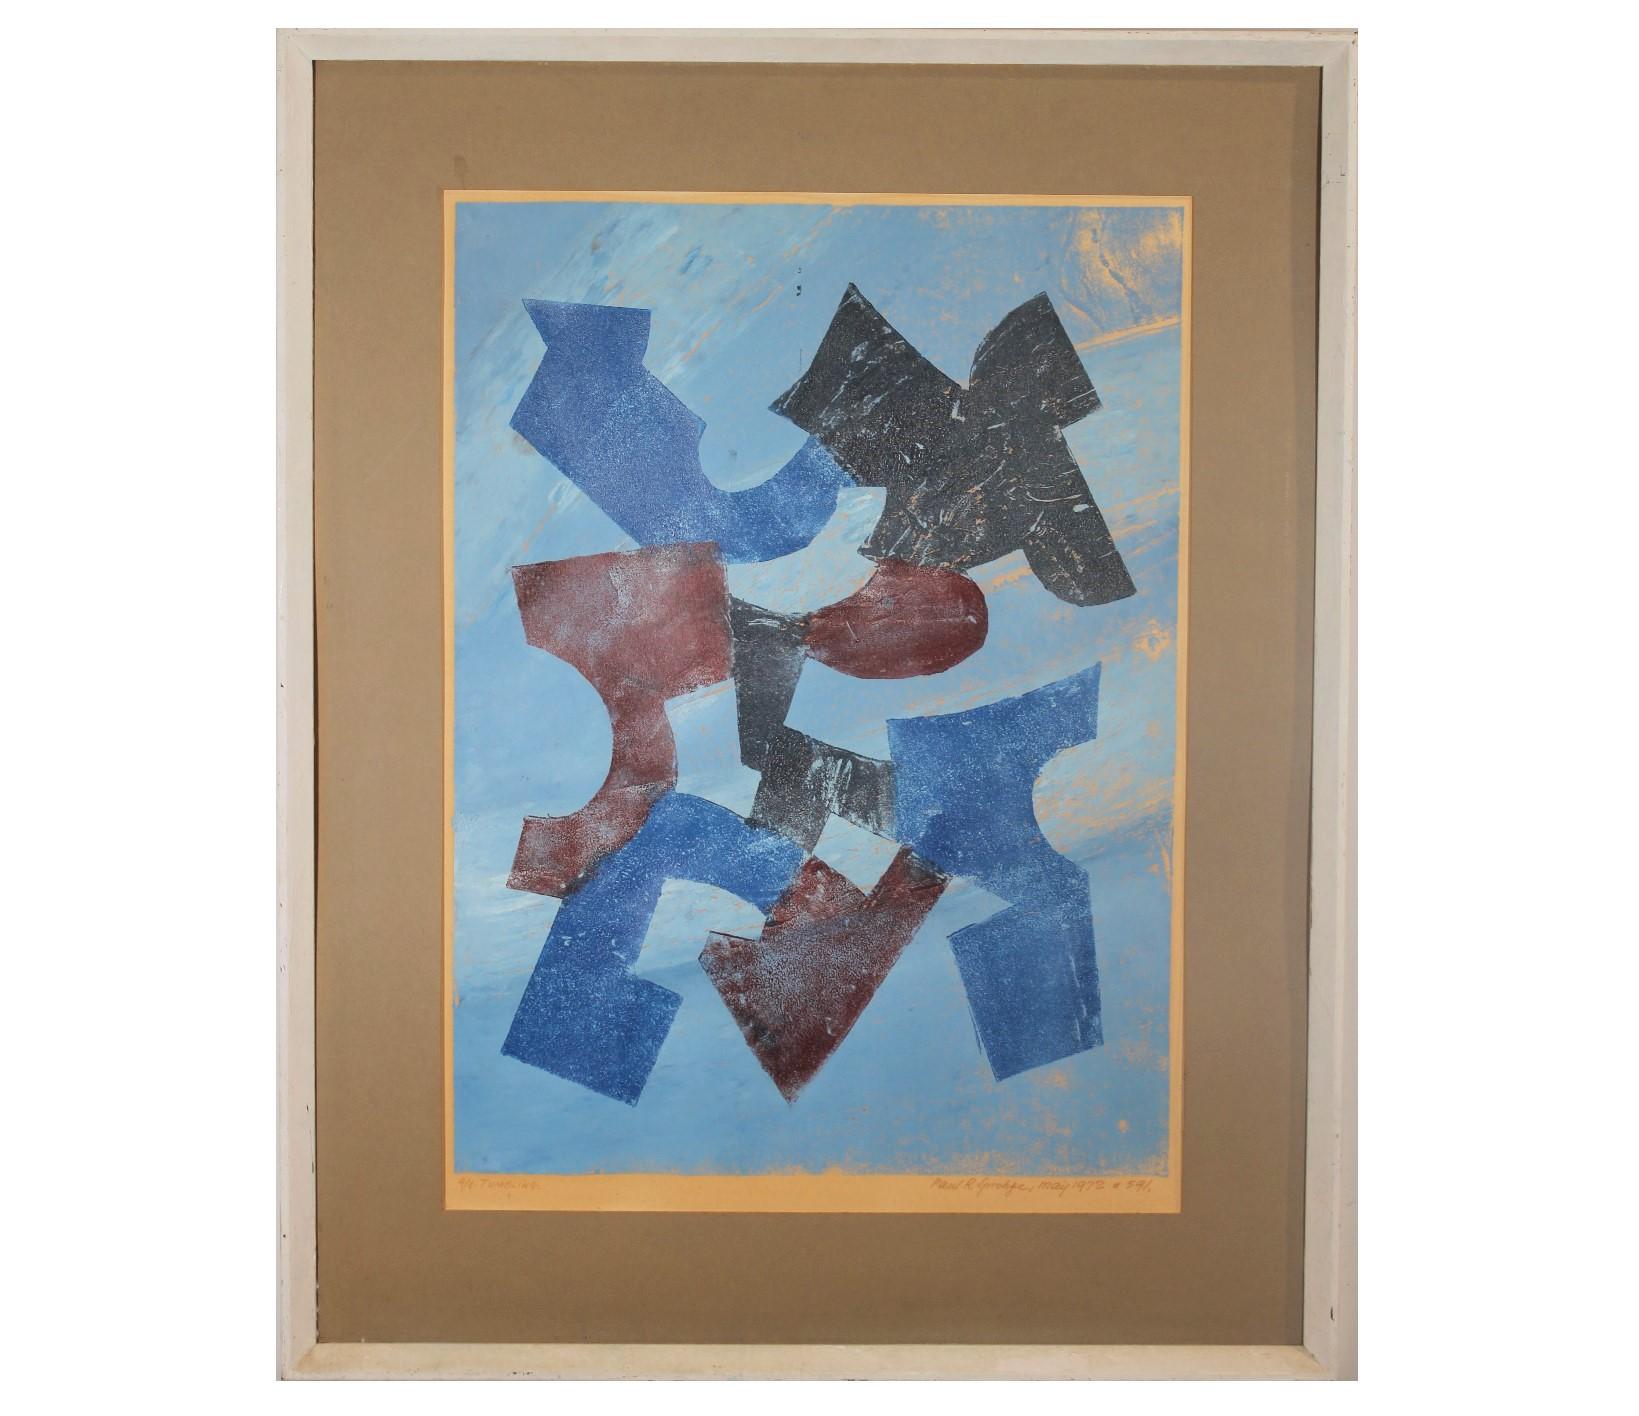 Paul Sprohge Abstract Print - "Tumbling" Abstract Geometric Print Edition 4 of 4 